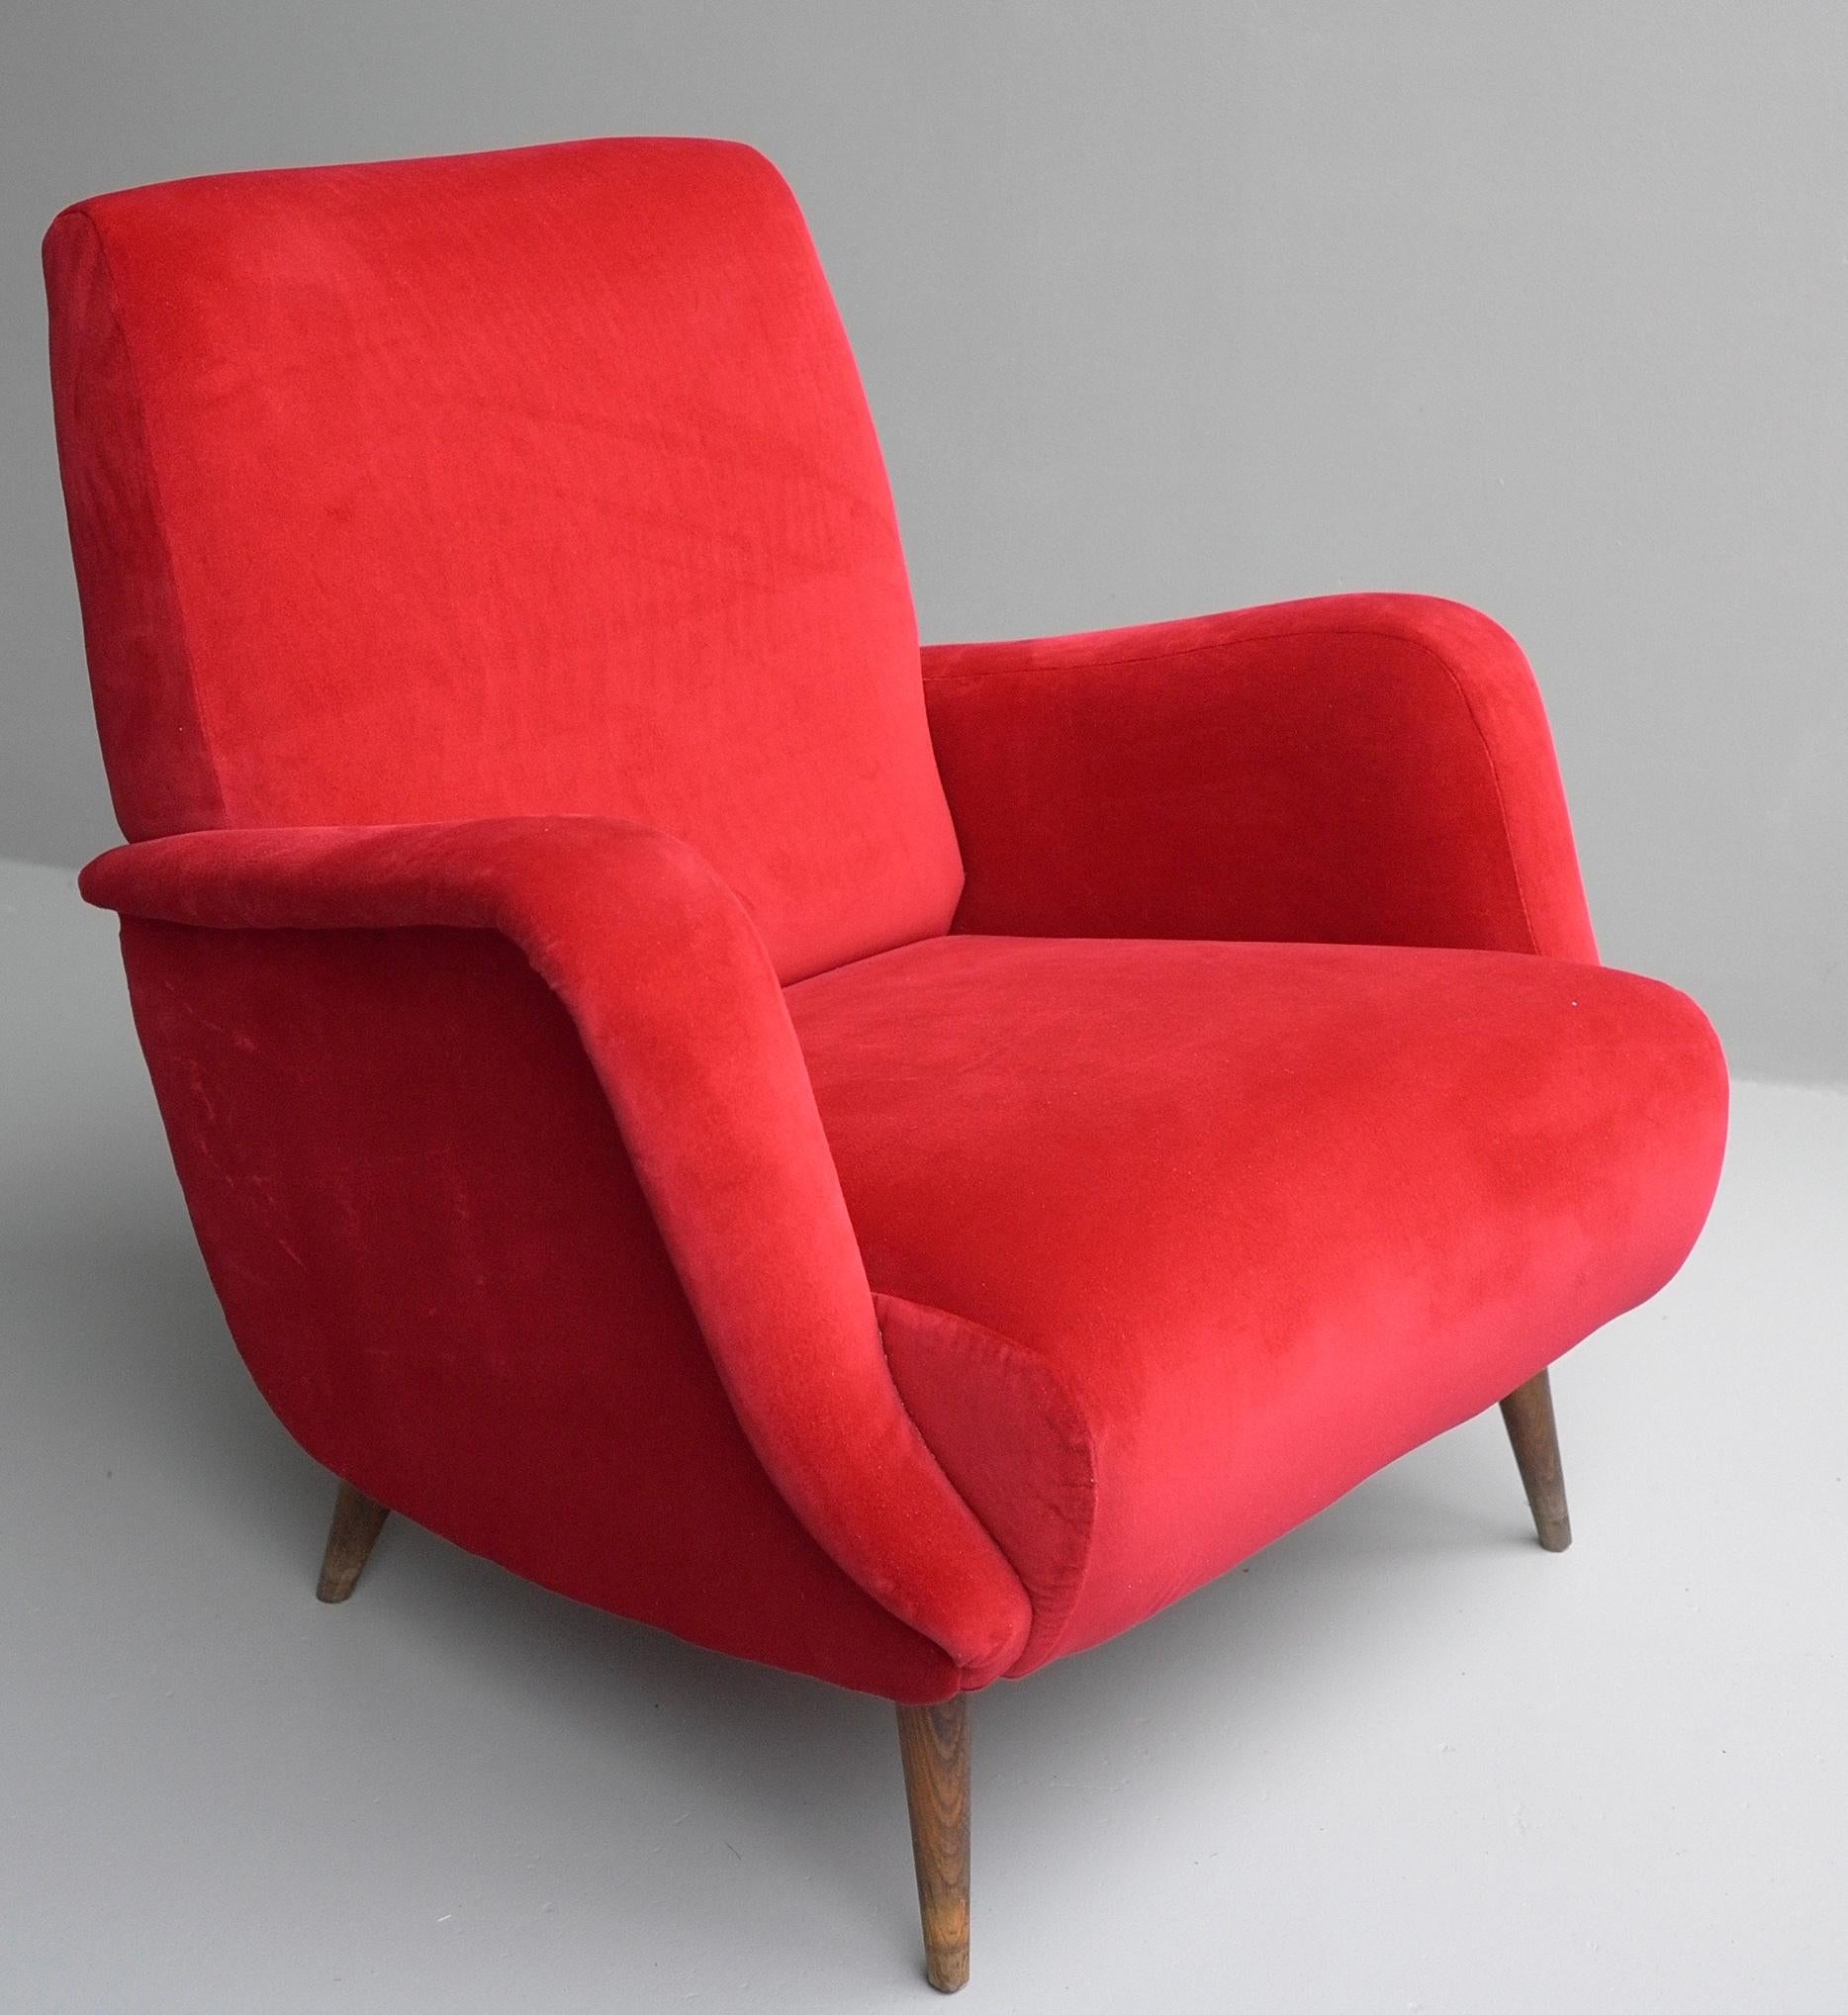 Carlo de Carli Red velvet and Walnut Armchair Model 806 by Cassina, Italy, 1955 In Good Condition For Sale In Den Haag, NL